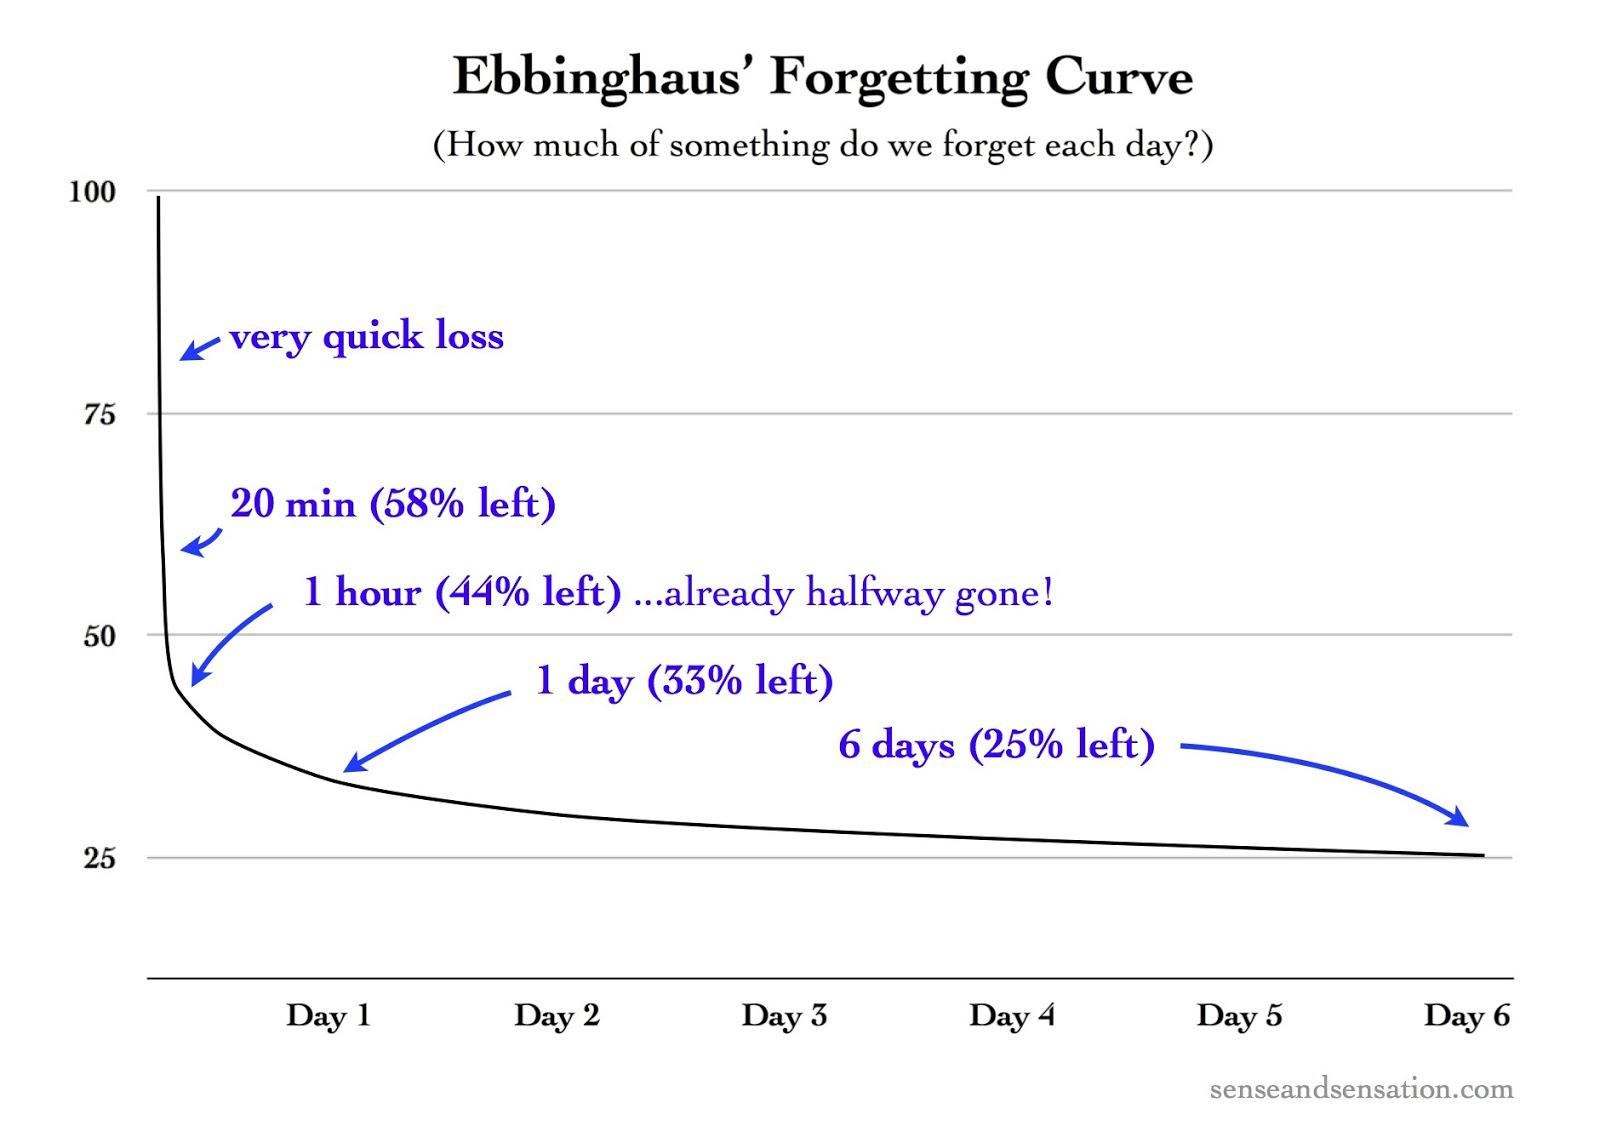 A graph of a steep, exponentially decreasing curve. At 20 minutes after learning, only 58 percent of knowledge is left. At 1 hour, only 44 percent is left. At one day, 33 percent is left, and at 6 days, 25 percent is left.